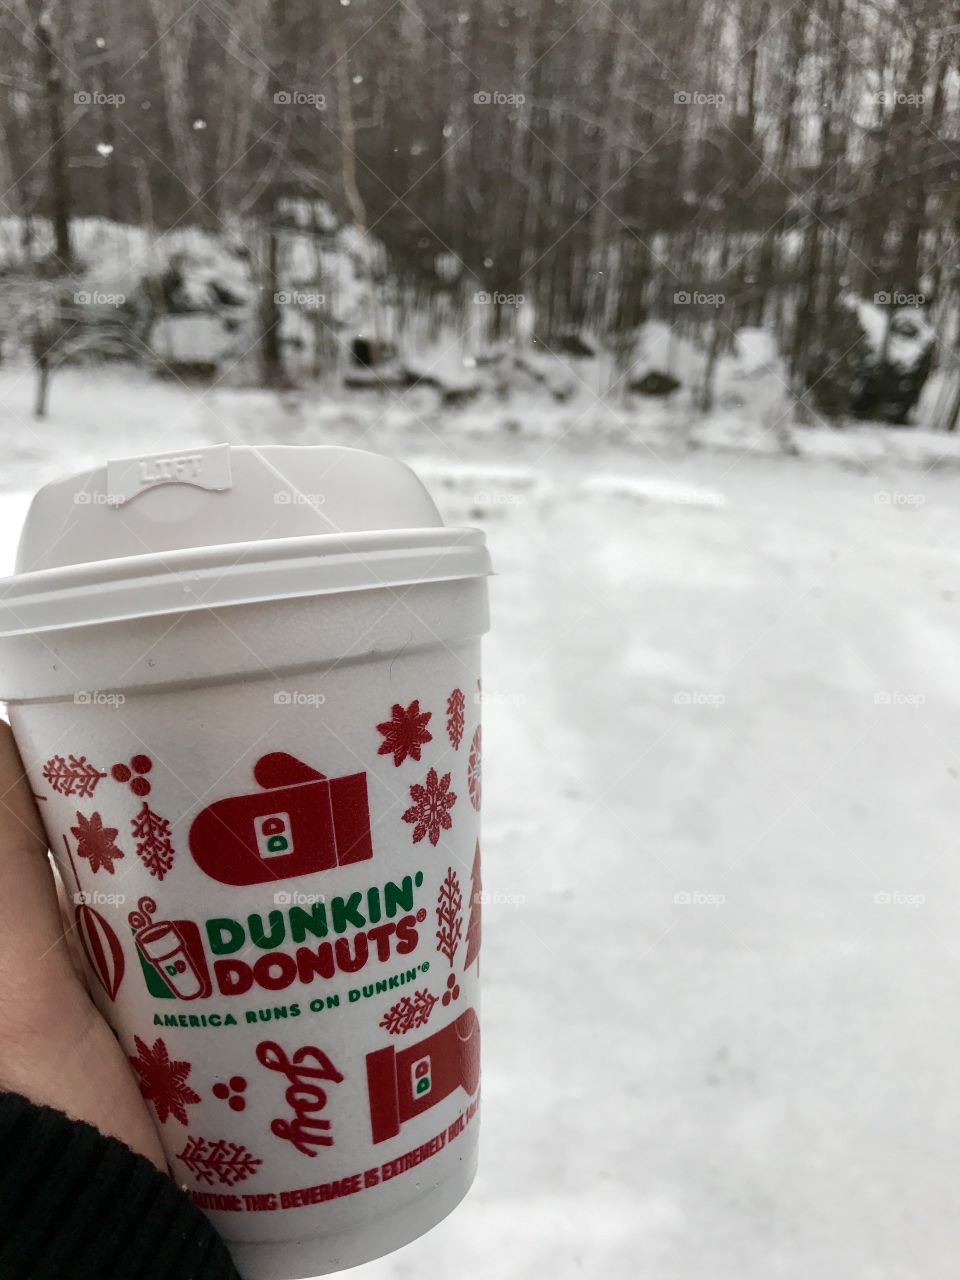 Keeping warm with Dunkin's